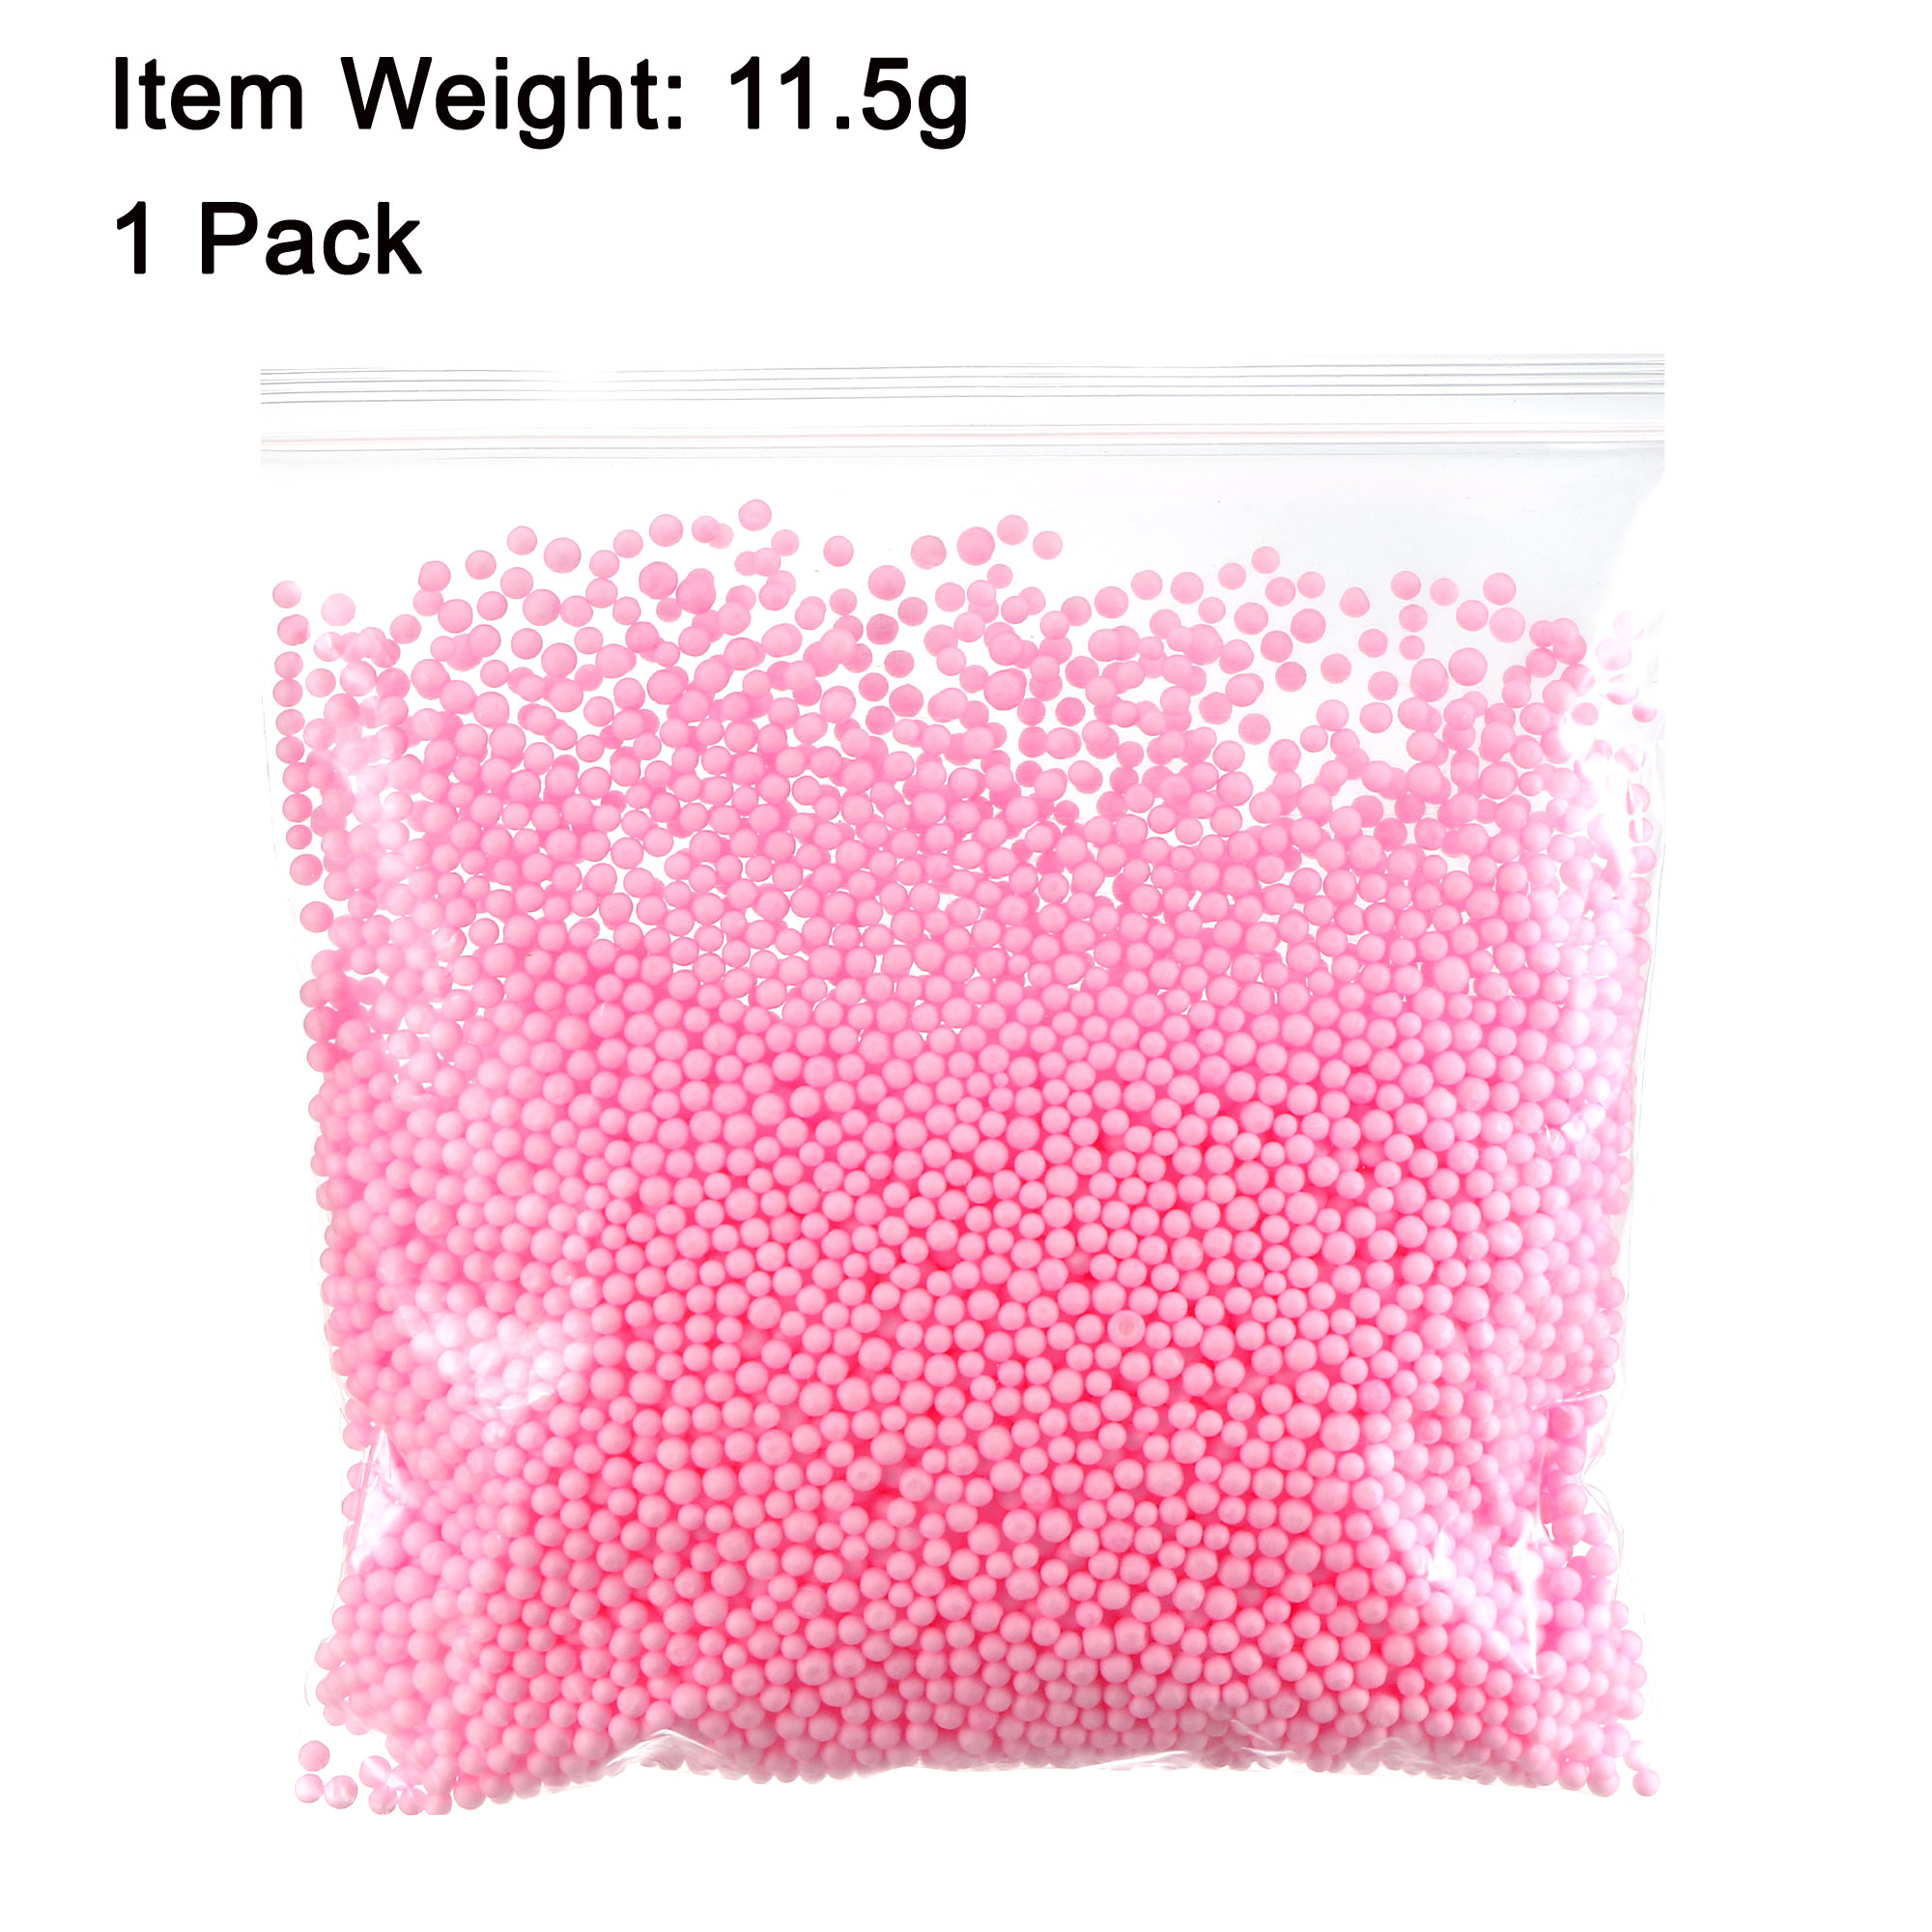 Uxcell 0.1 inch Pink Polystyrene Foam Beads Ball Mini for Crafts Fillings 1 Pack